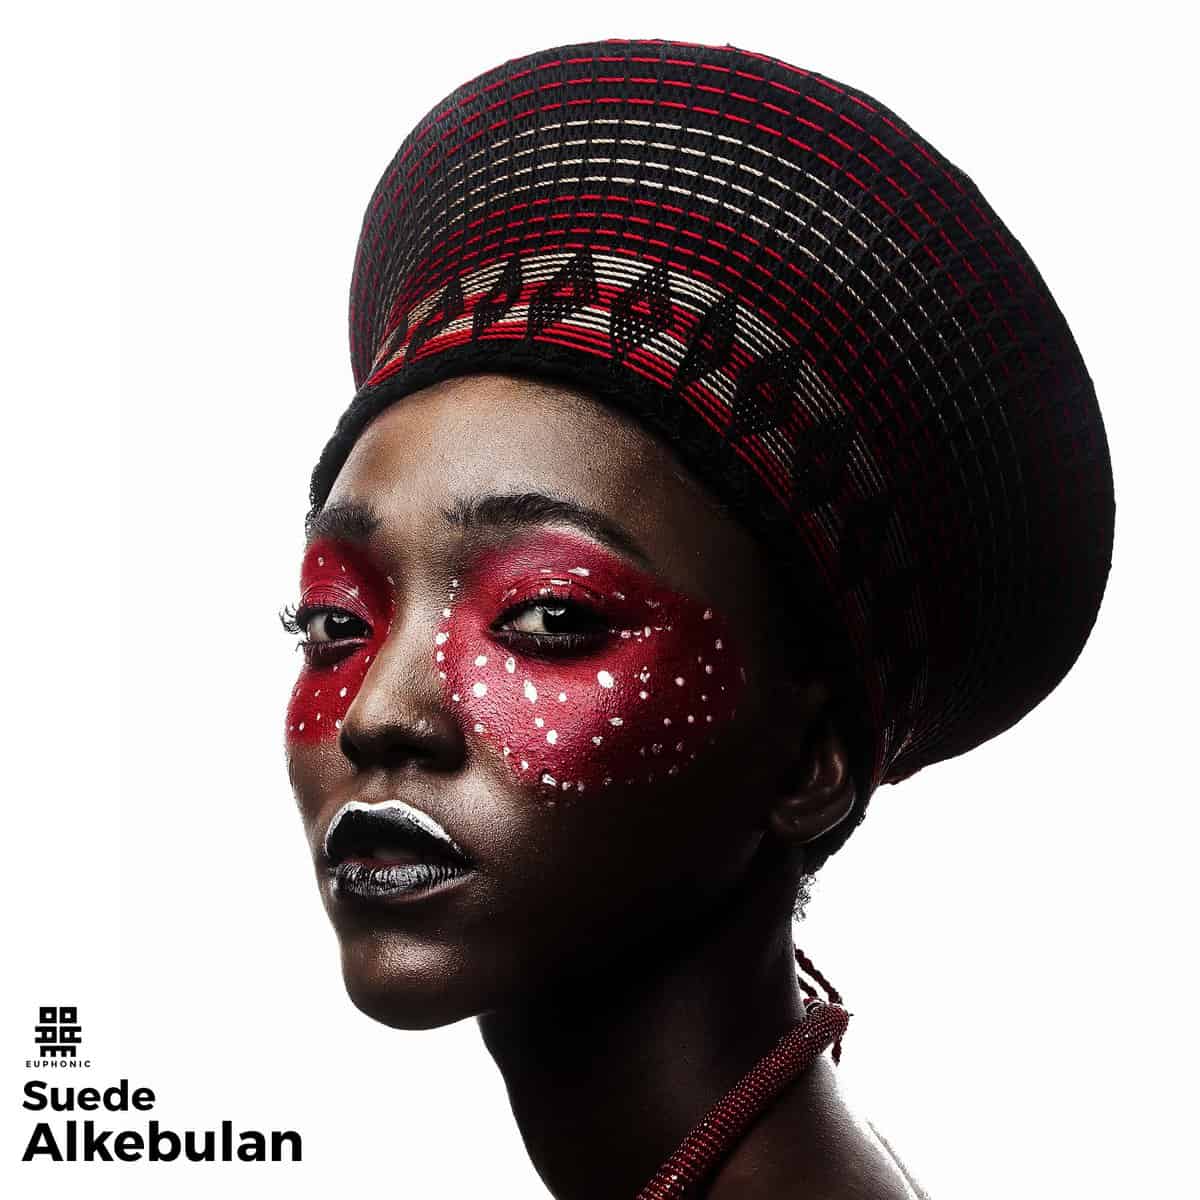 Suede’s “Alkebulan” is an Africa anthem that plays to all the genre’s tropes